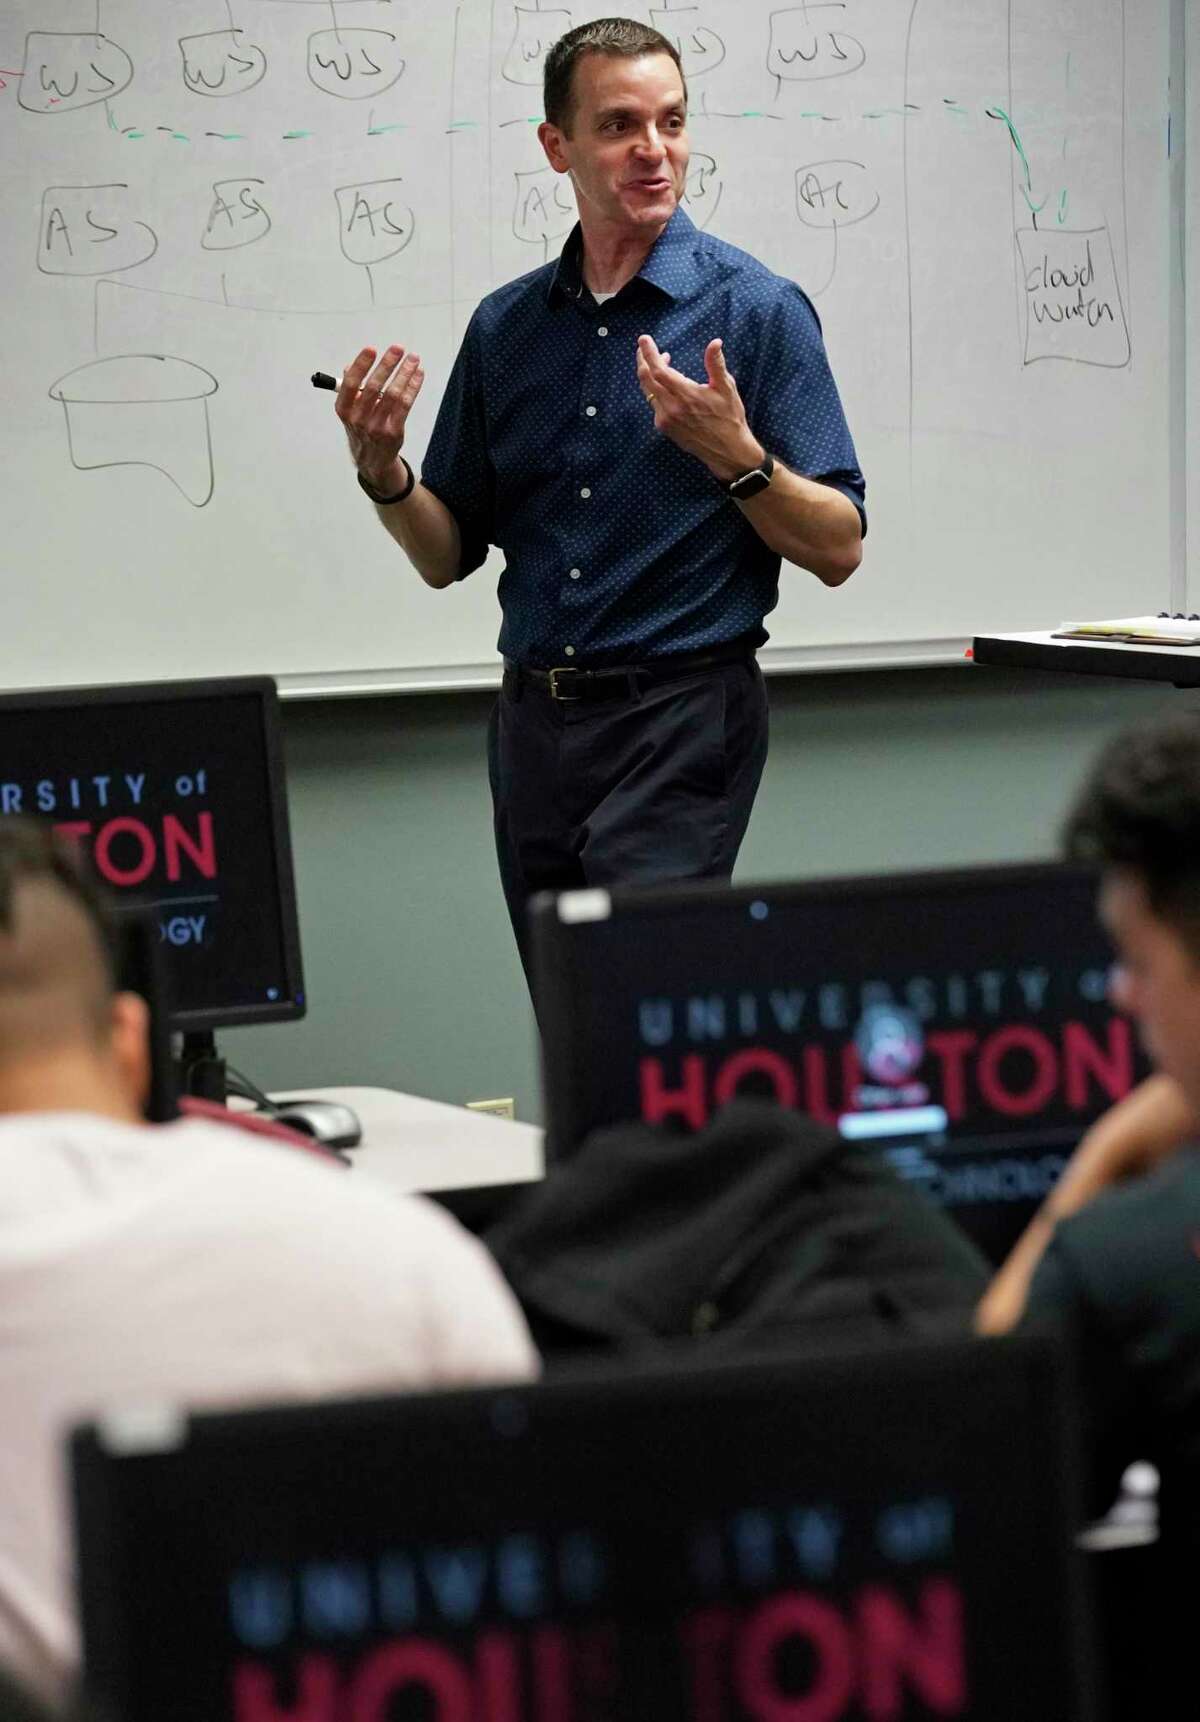 José C. Martínez, an instructional assistant professor of computer information systems, is shown during his class on cloud computing at University of Houston Tuesday, Oct. 29, 2019, in Houston.